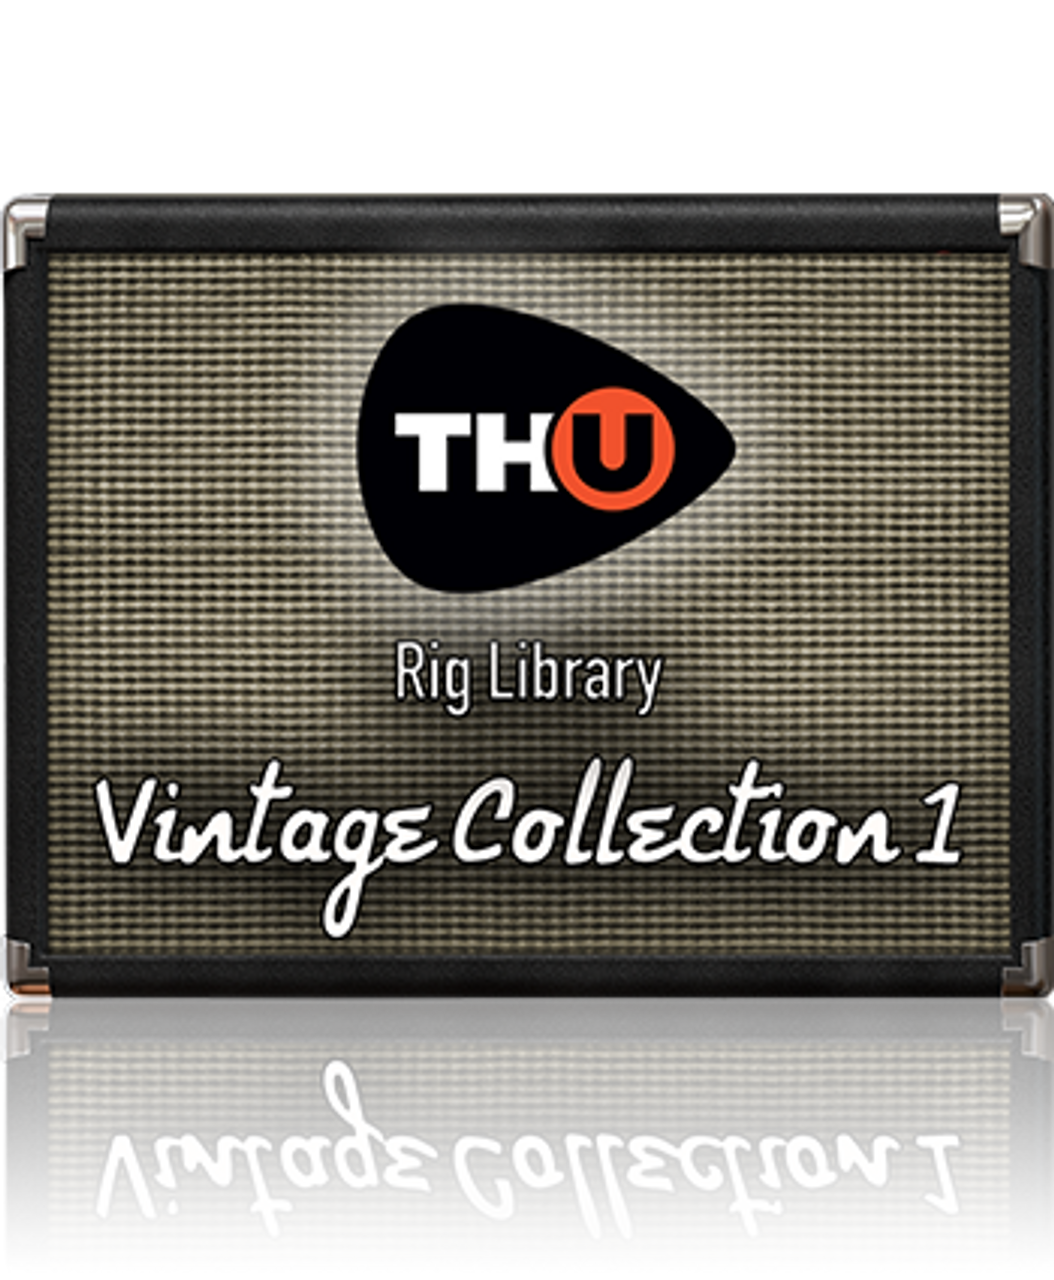 Vintage Collection Vol.1 - Rig Library for TH-U